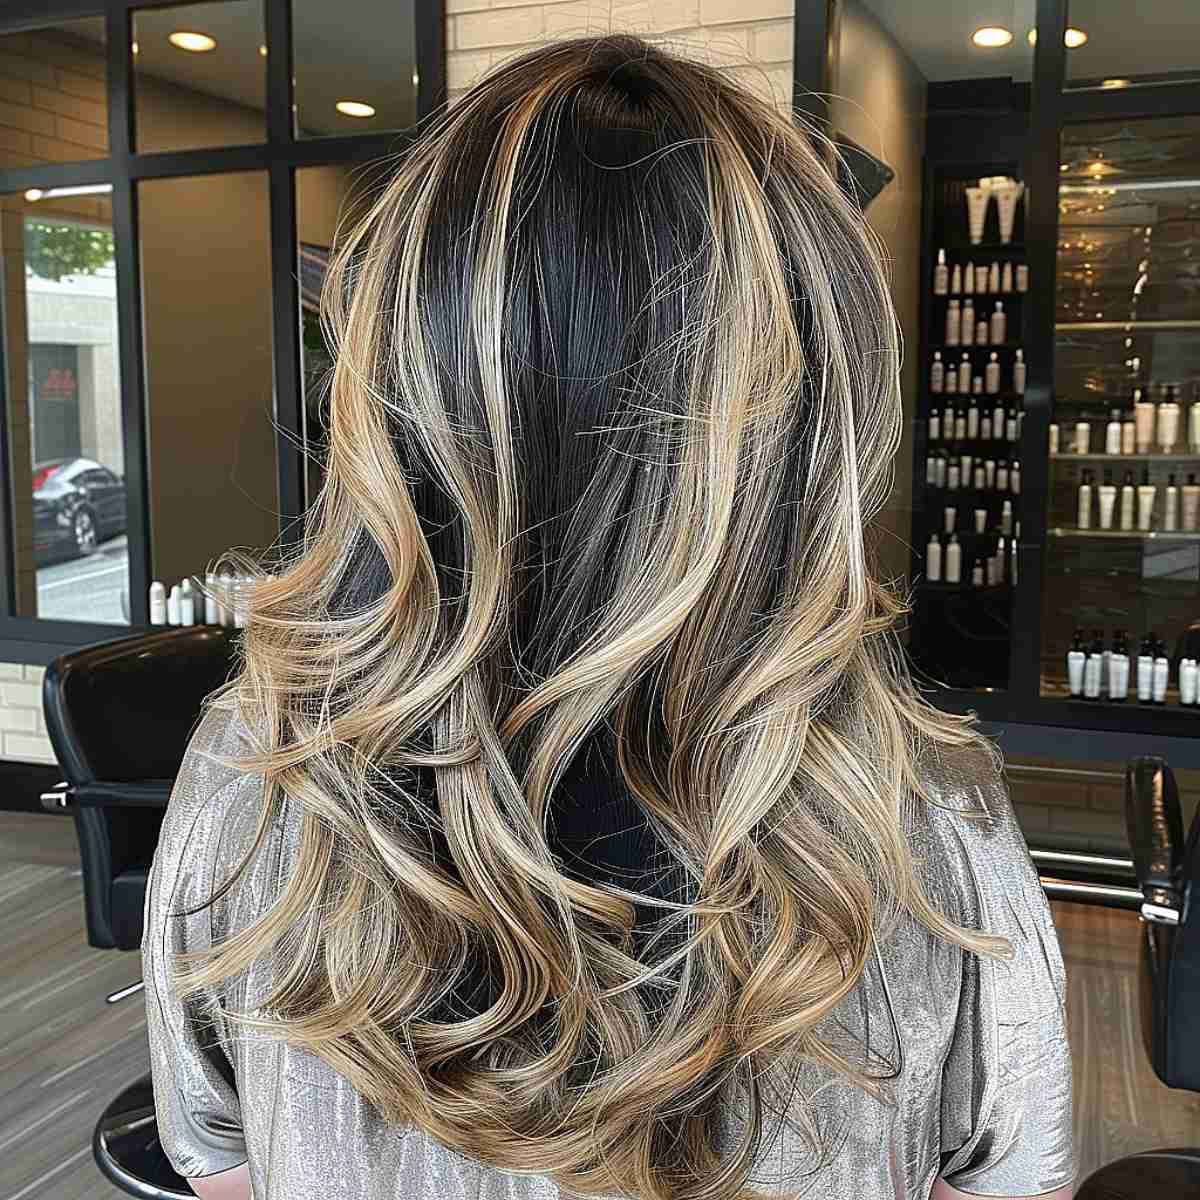 Sultry Black Hair with Chunky Blonde Highlights